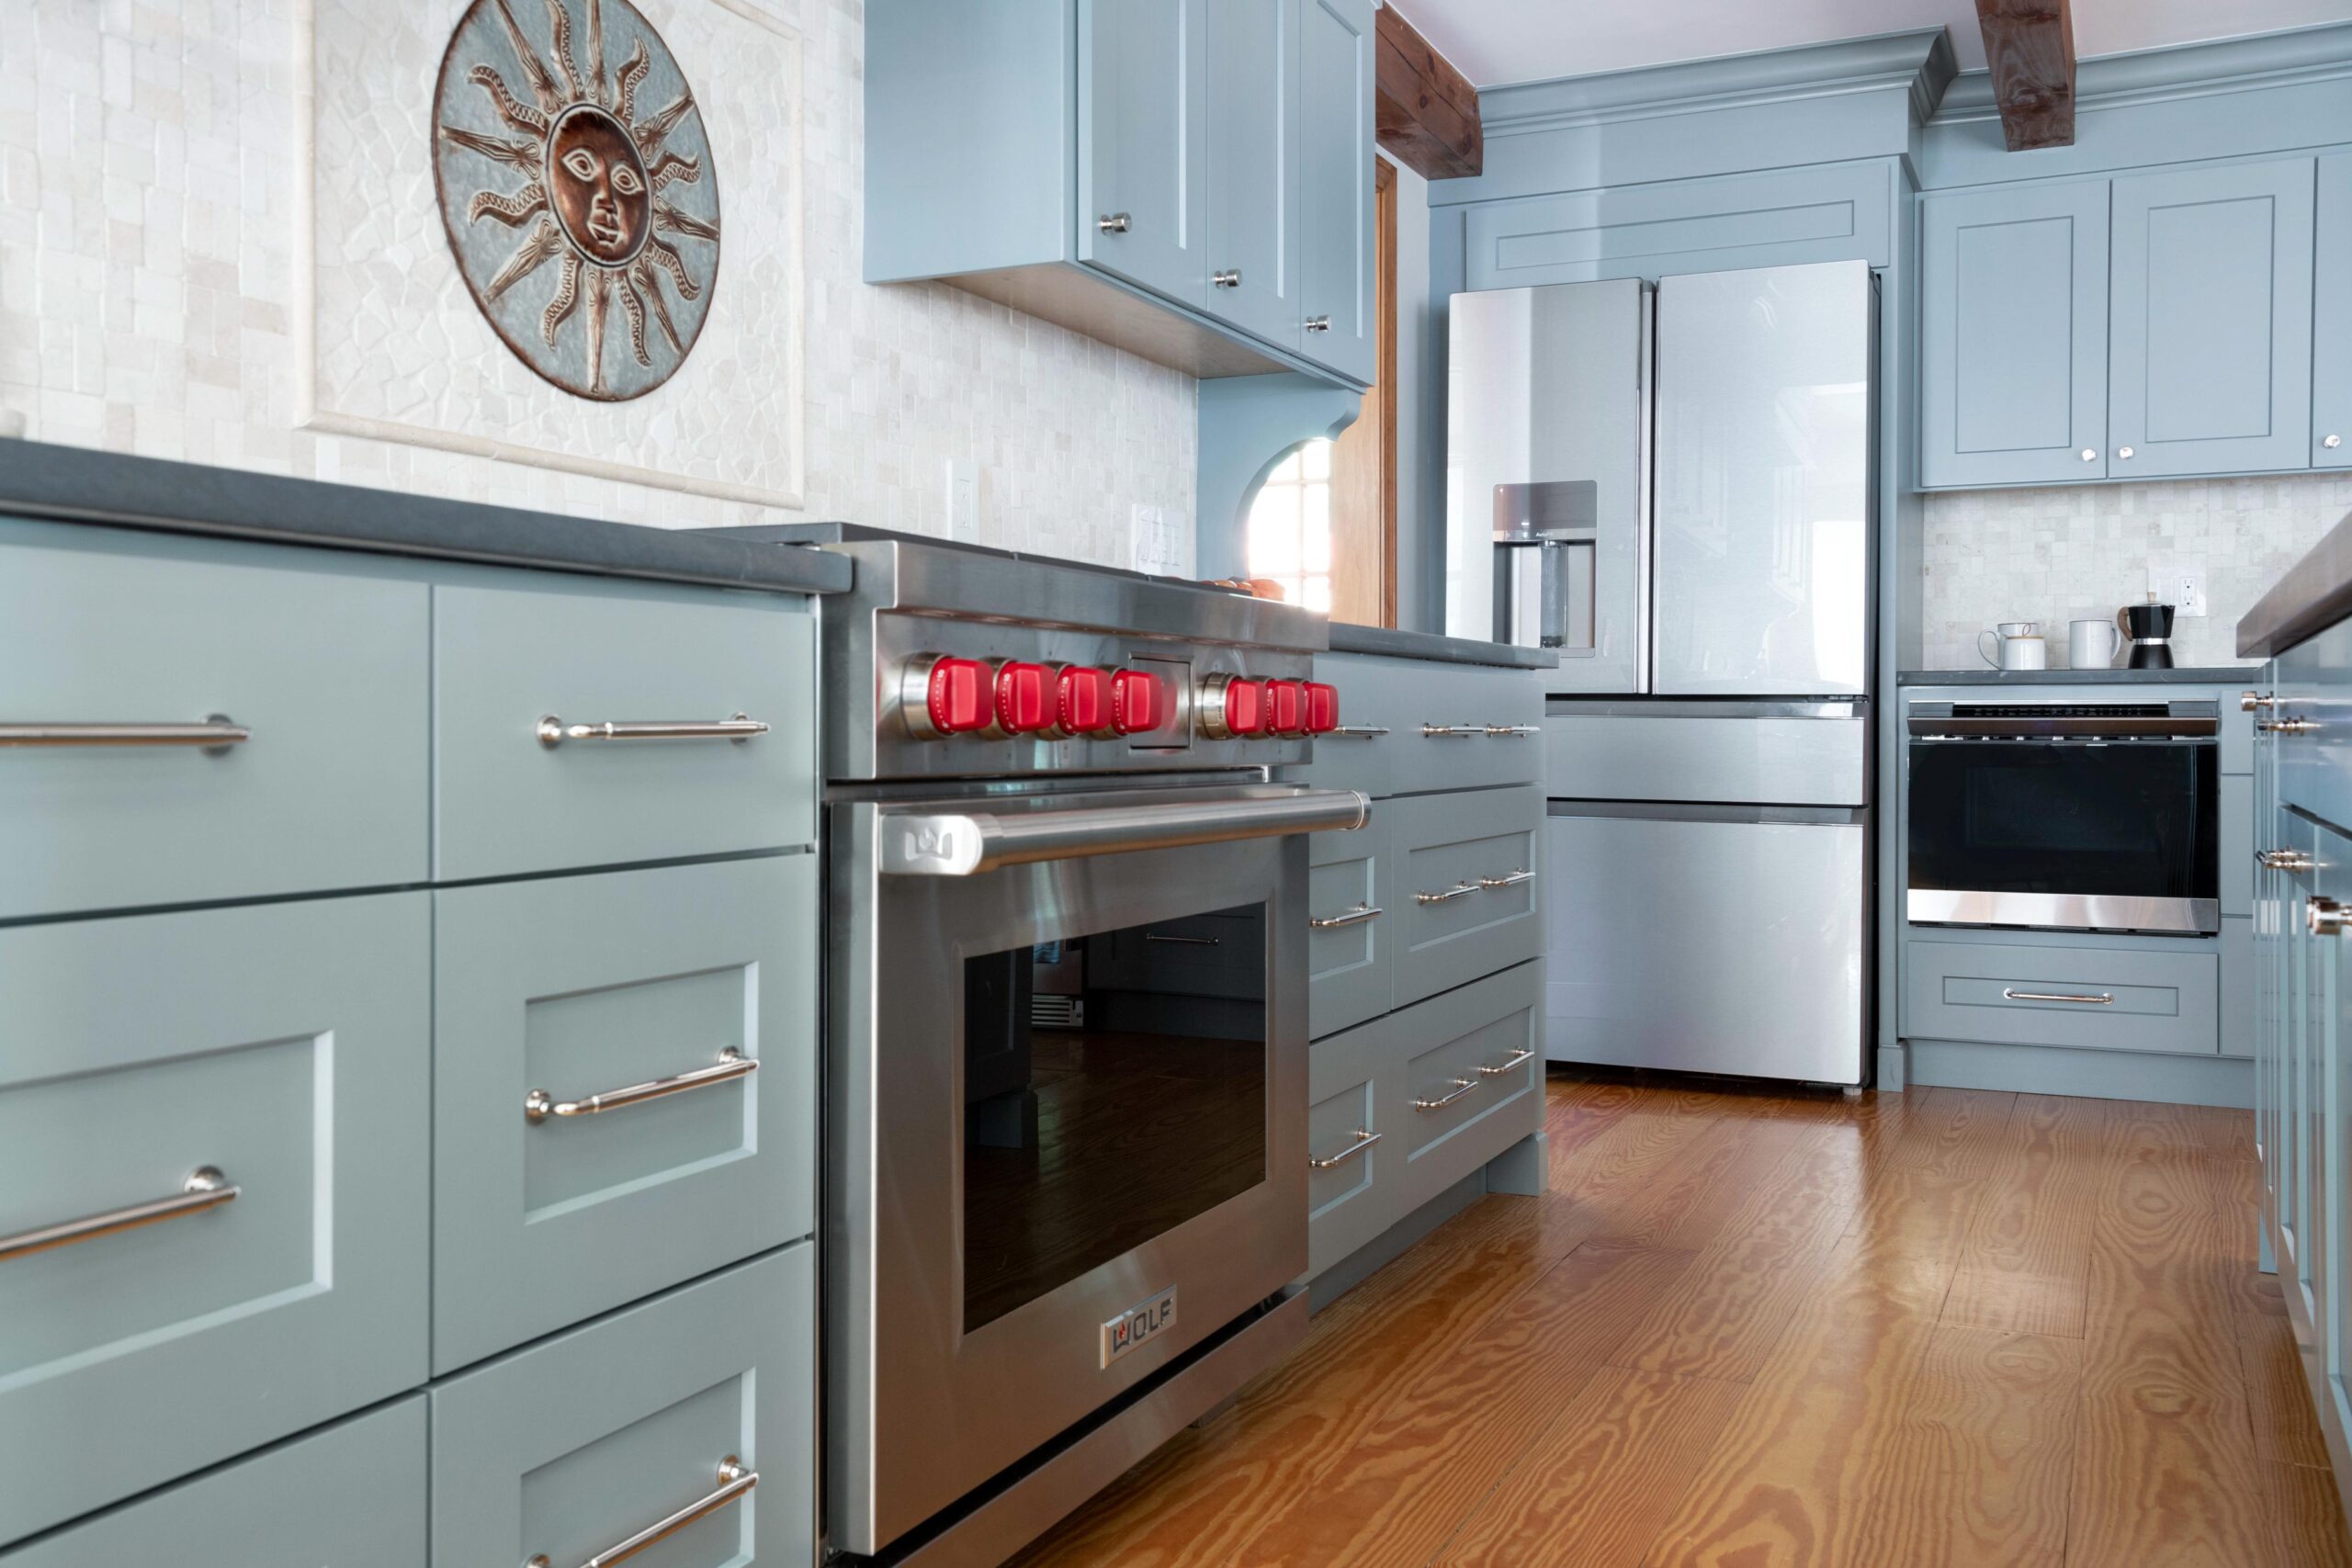 Blue cabinets line the wall of this kitchen. It has a cooking range with bright red control knobs. The two door refrigerator in this kitchen matches the color if the cabinets.